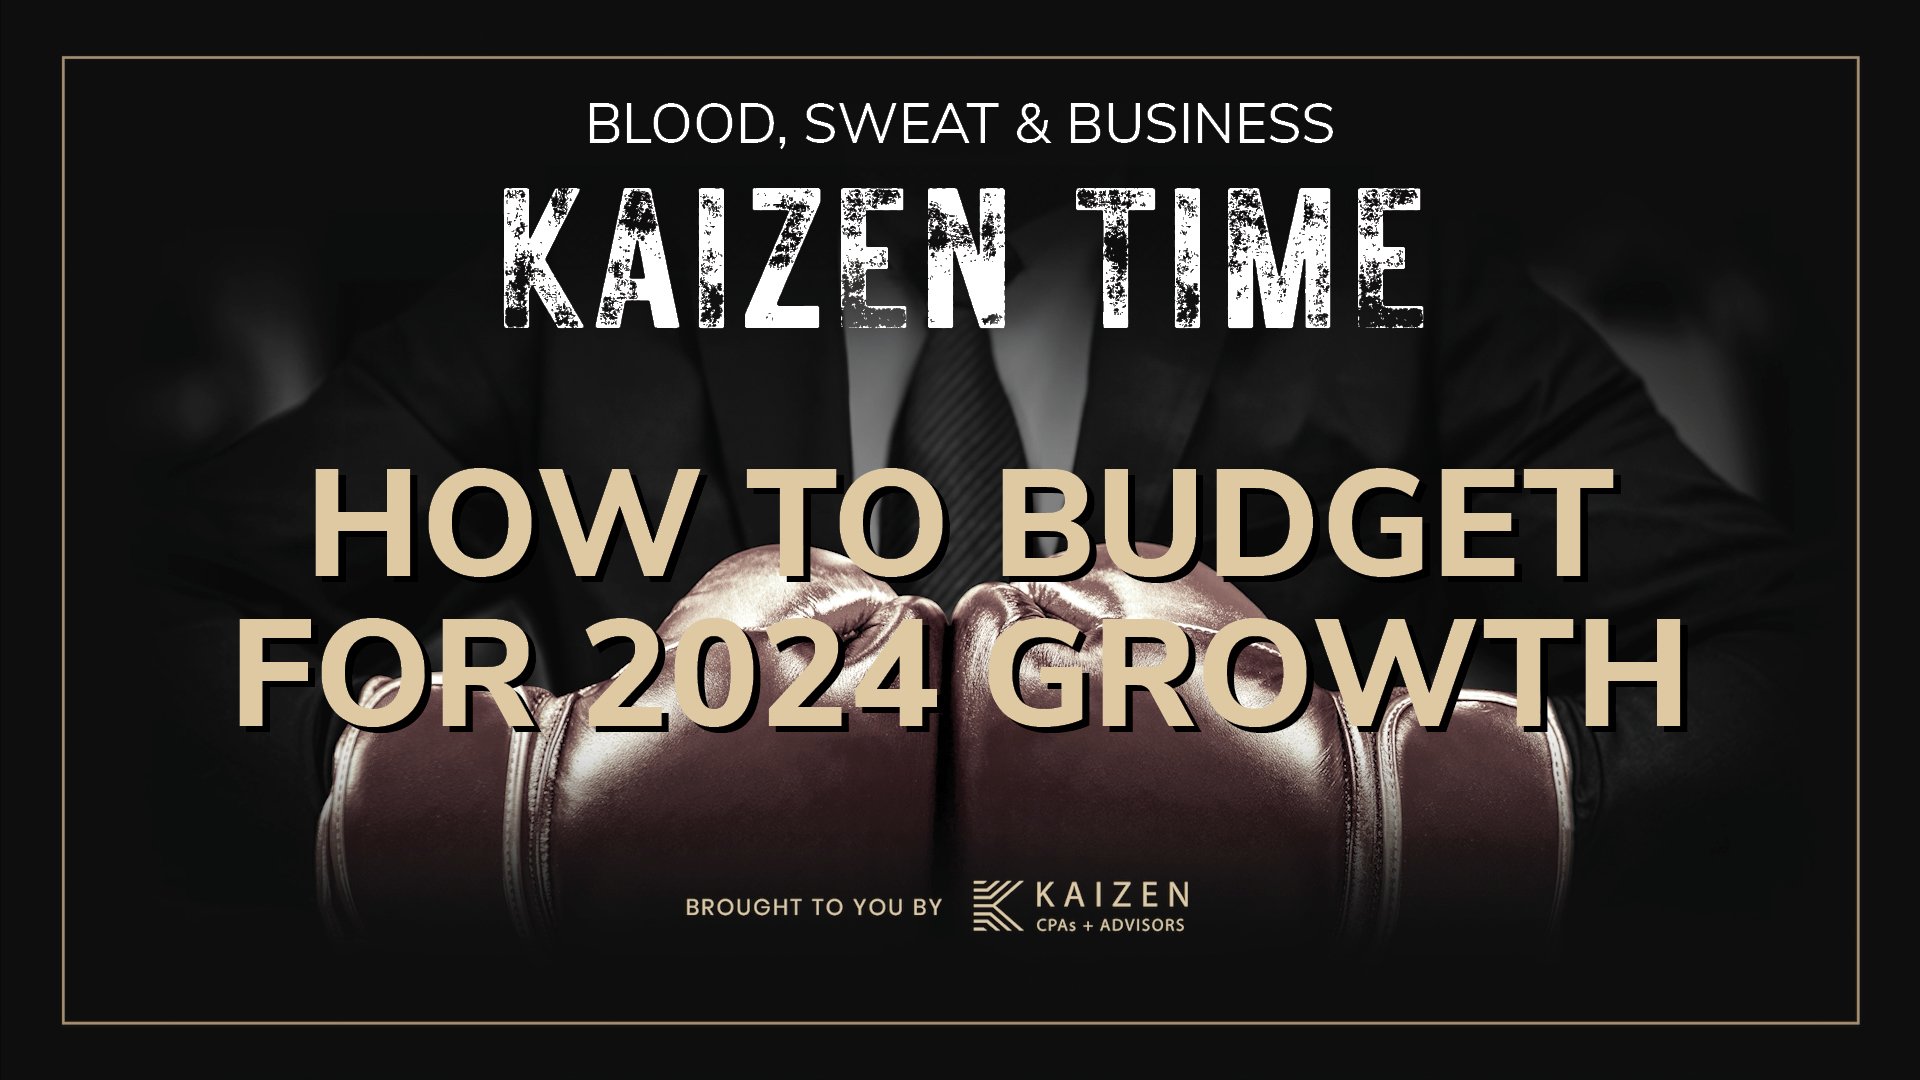 Create a small business budget that drives growth in 2024.